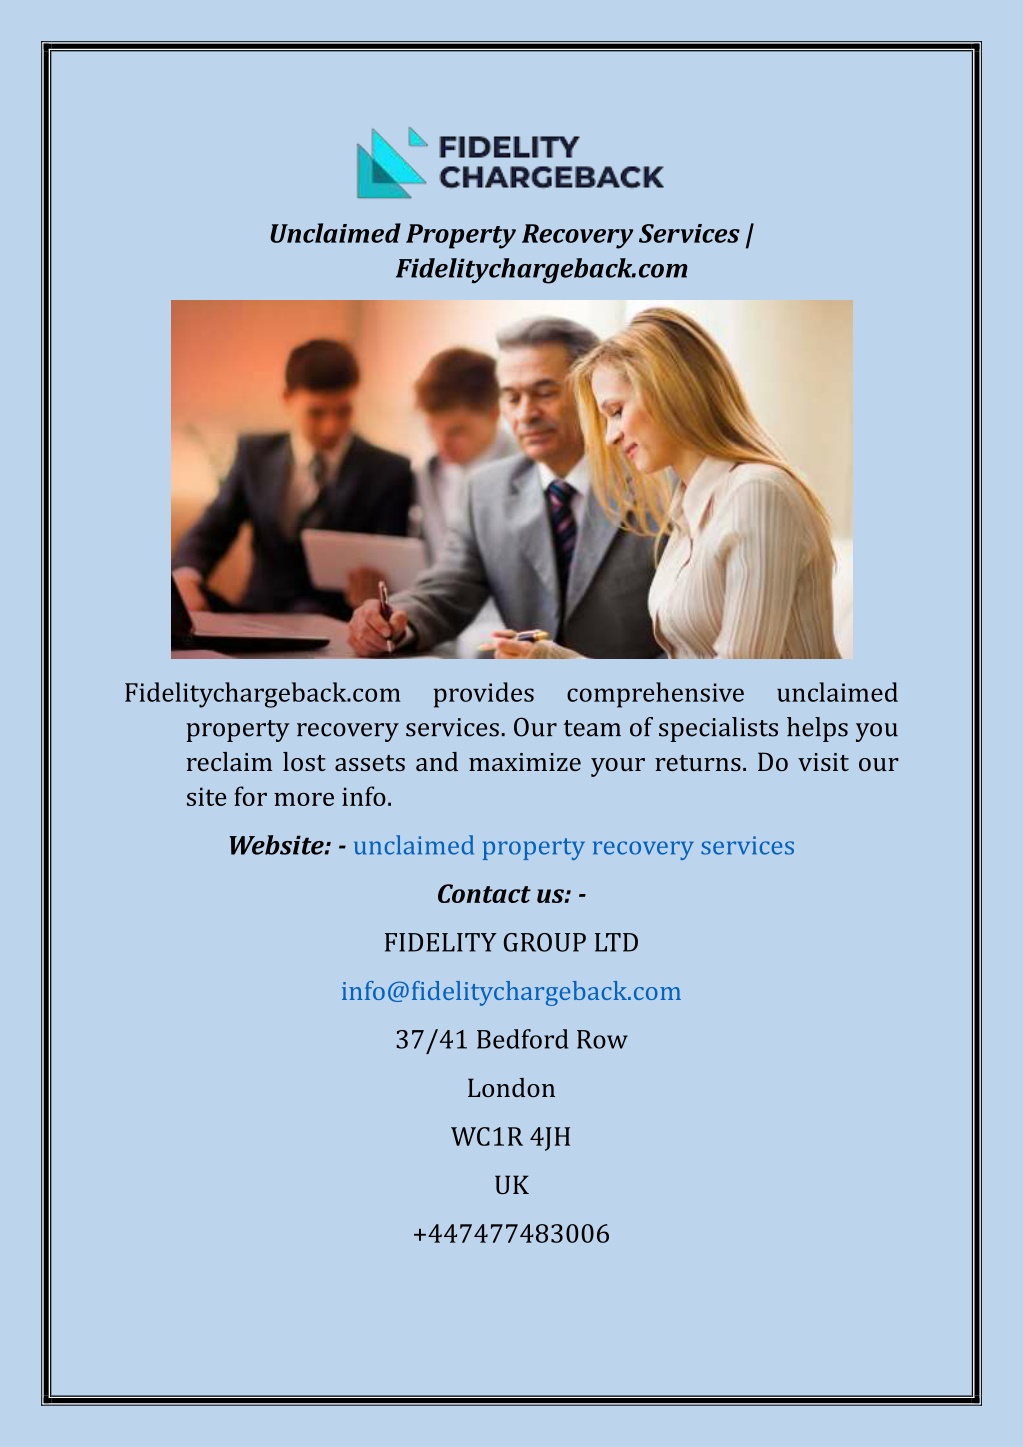 PPT Unclaimed Property Recovery Services Fidelitychargeback Copy